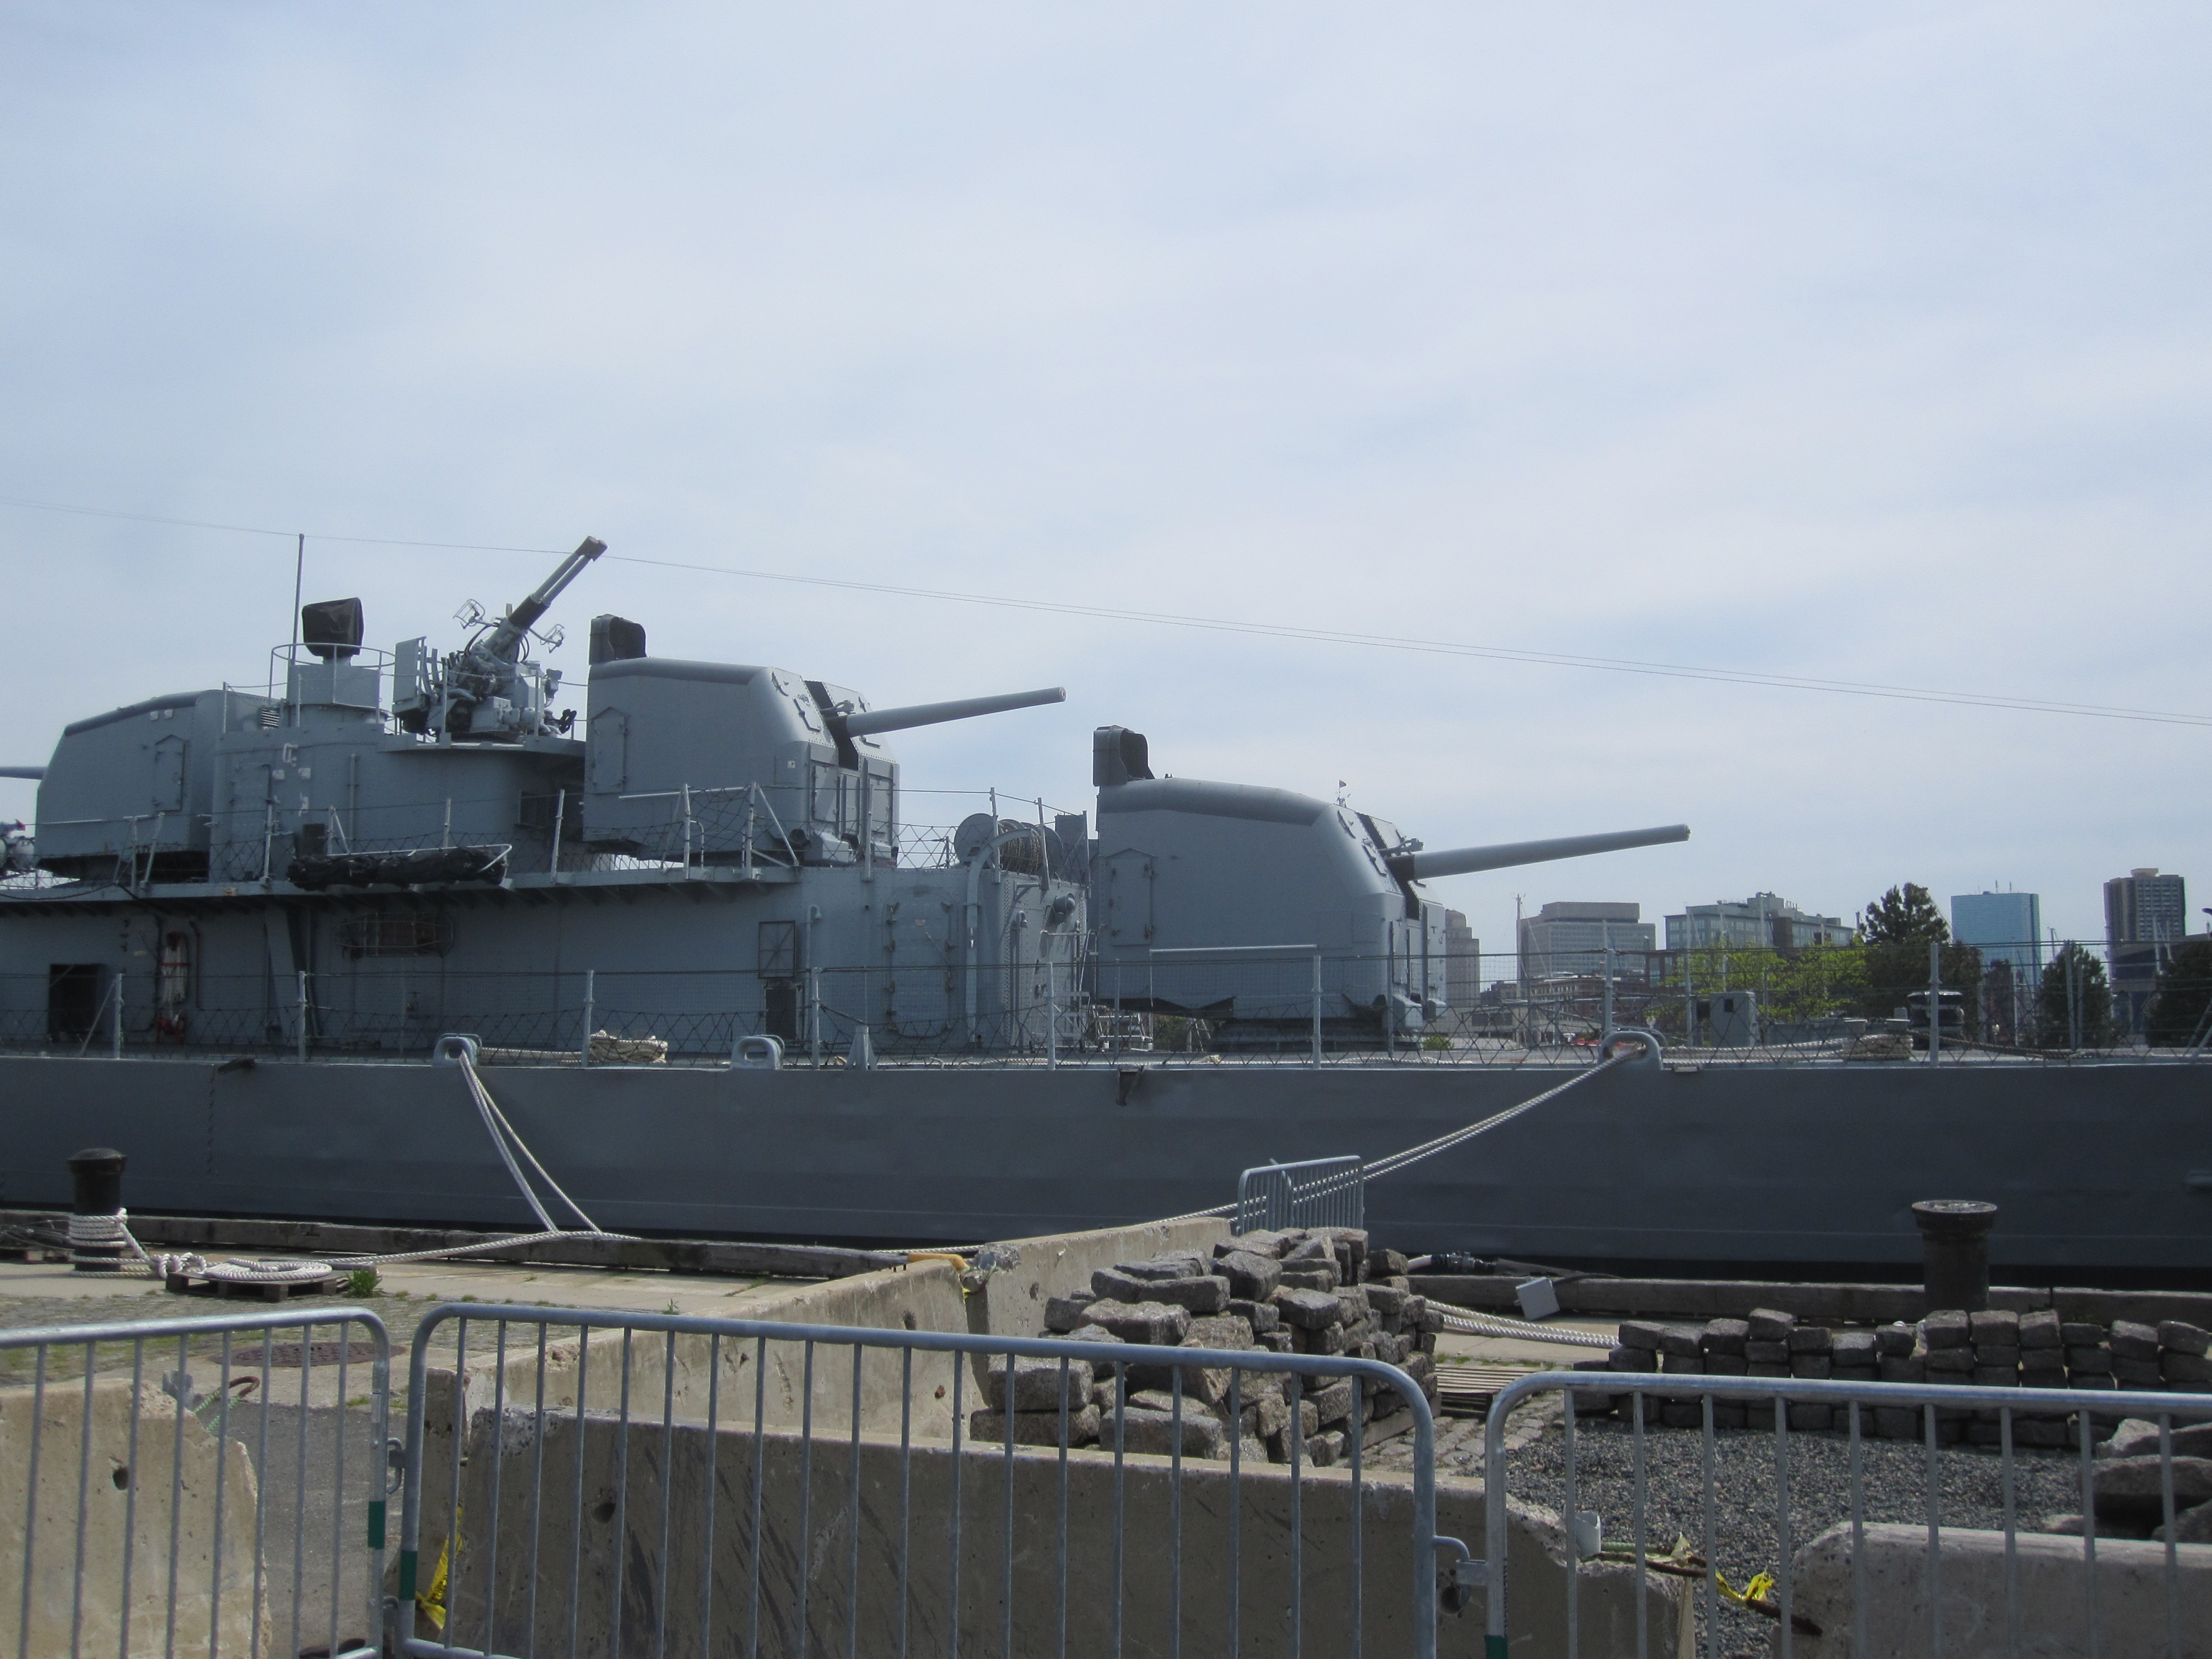 Museum ship USS Cassin Young at Charlestown Navy Yard, Boston, Massachusetts, United States, 28 May 2013, photo 4 of 6